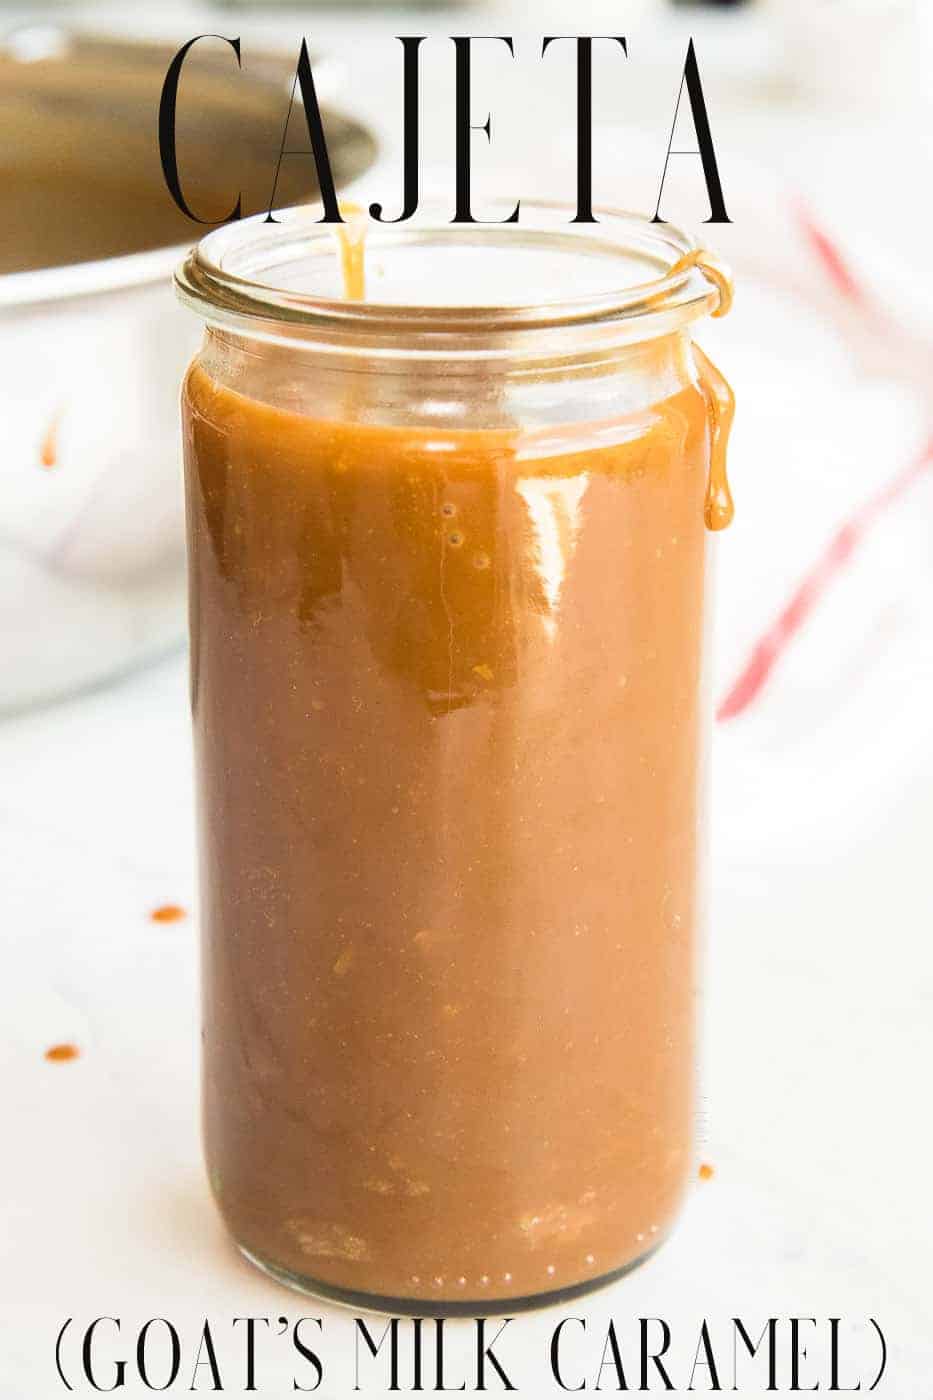 Cajeta is a new way to enjoy a favorite dessert sauce. Made with goat's milk, this creamy, buttery topping or filling has a slight tang on the finish. Easy to make, but even easier to enjoy. #cajeta #goatmilk #caramelsauce #goatsmilkcaramel #dessertsauce #sauce #dessert #Hispanic #Latin #Spanish #brownsugar #buttercaramel via @ediblesense